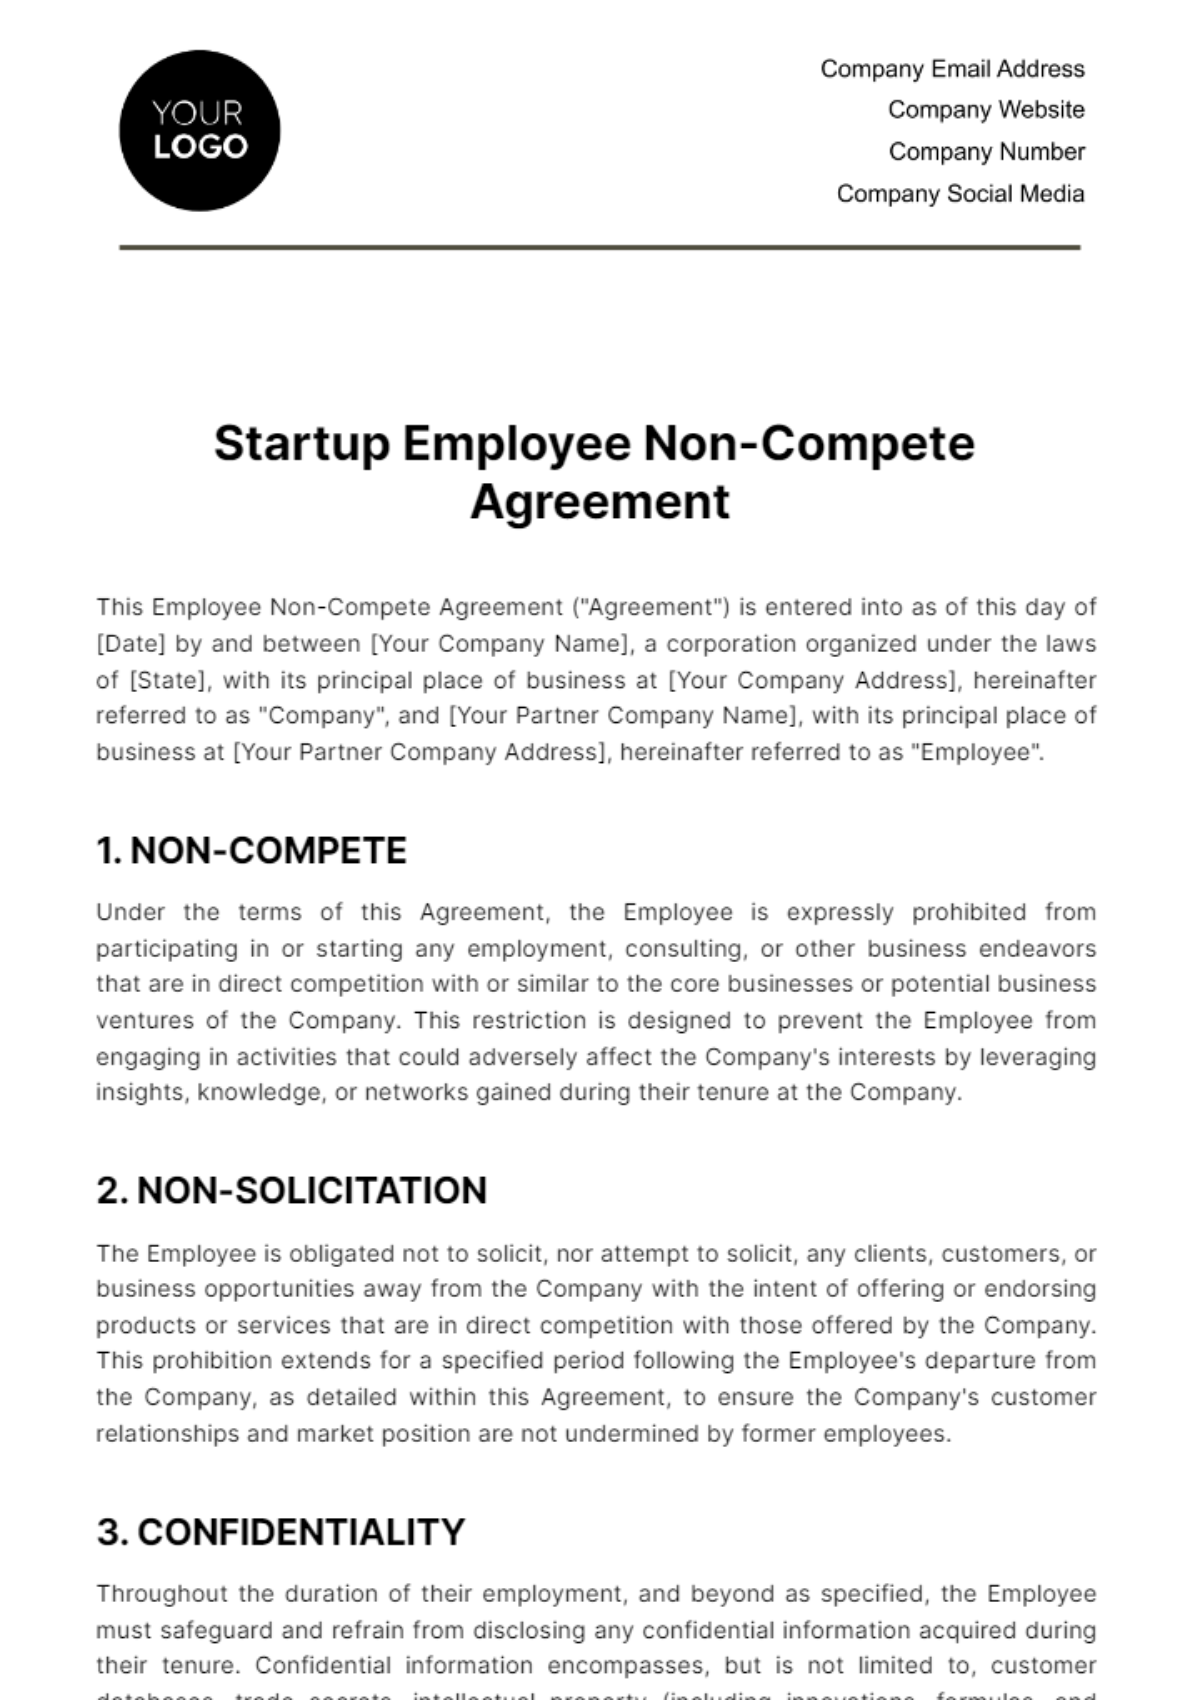 Free Startup Employee Non-Compete Agreement Template